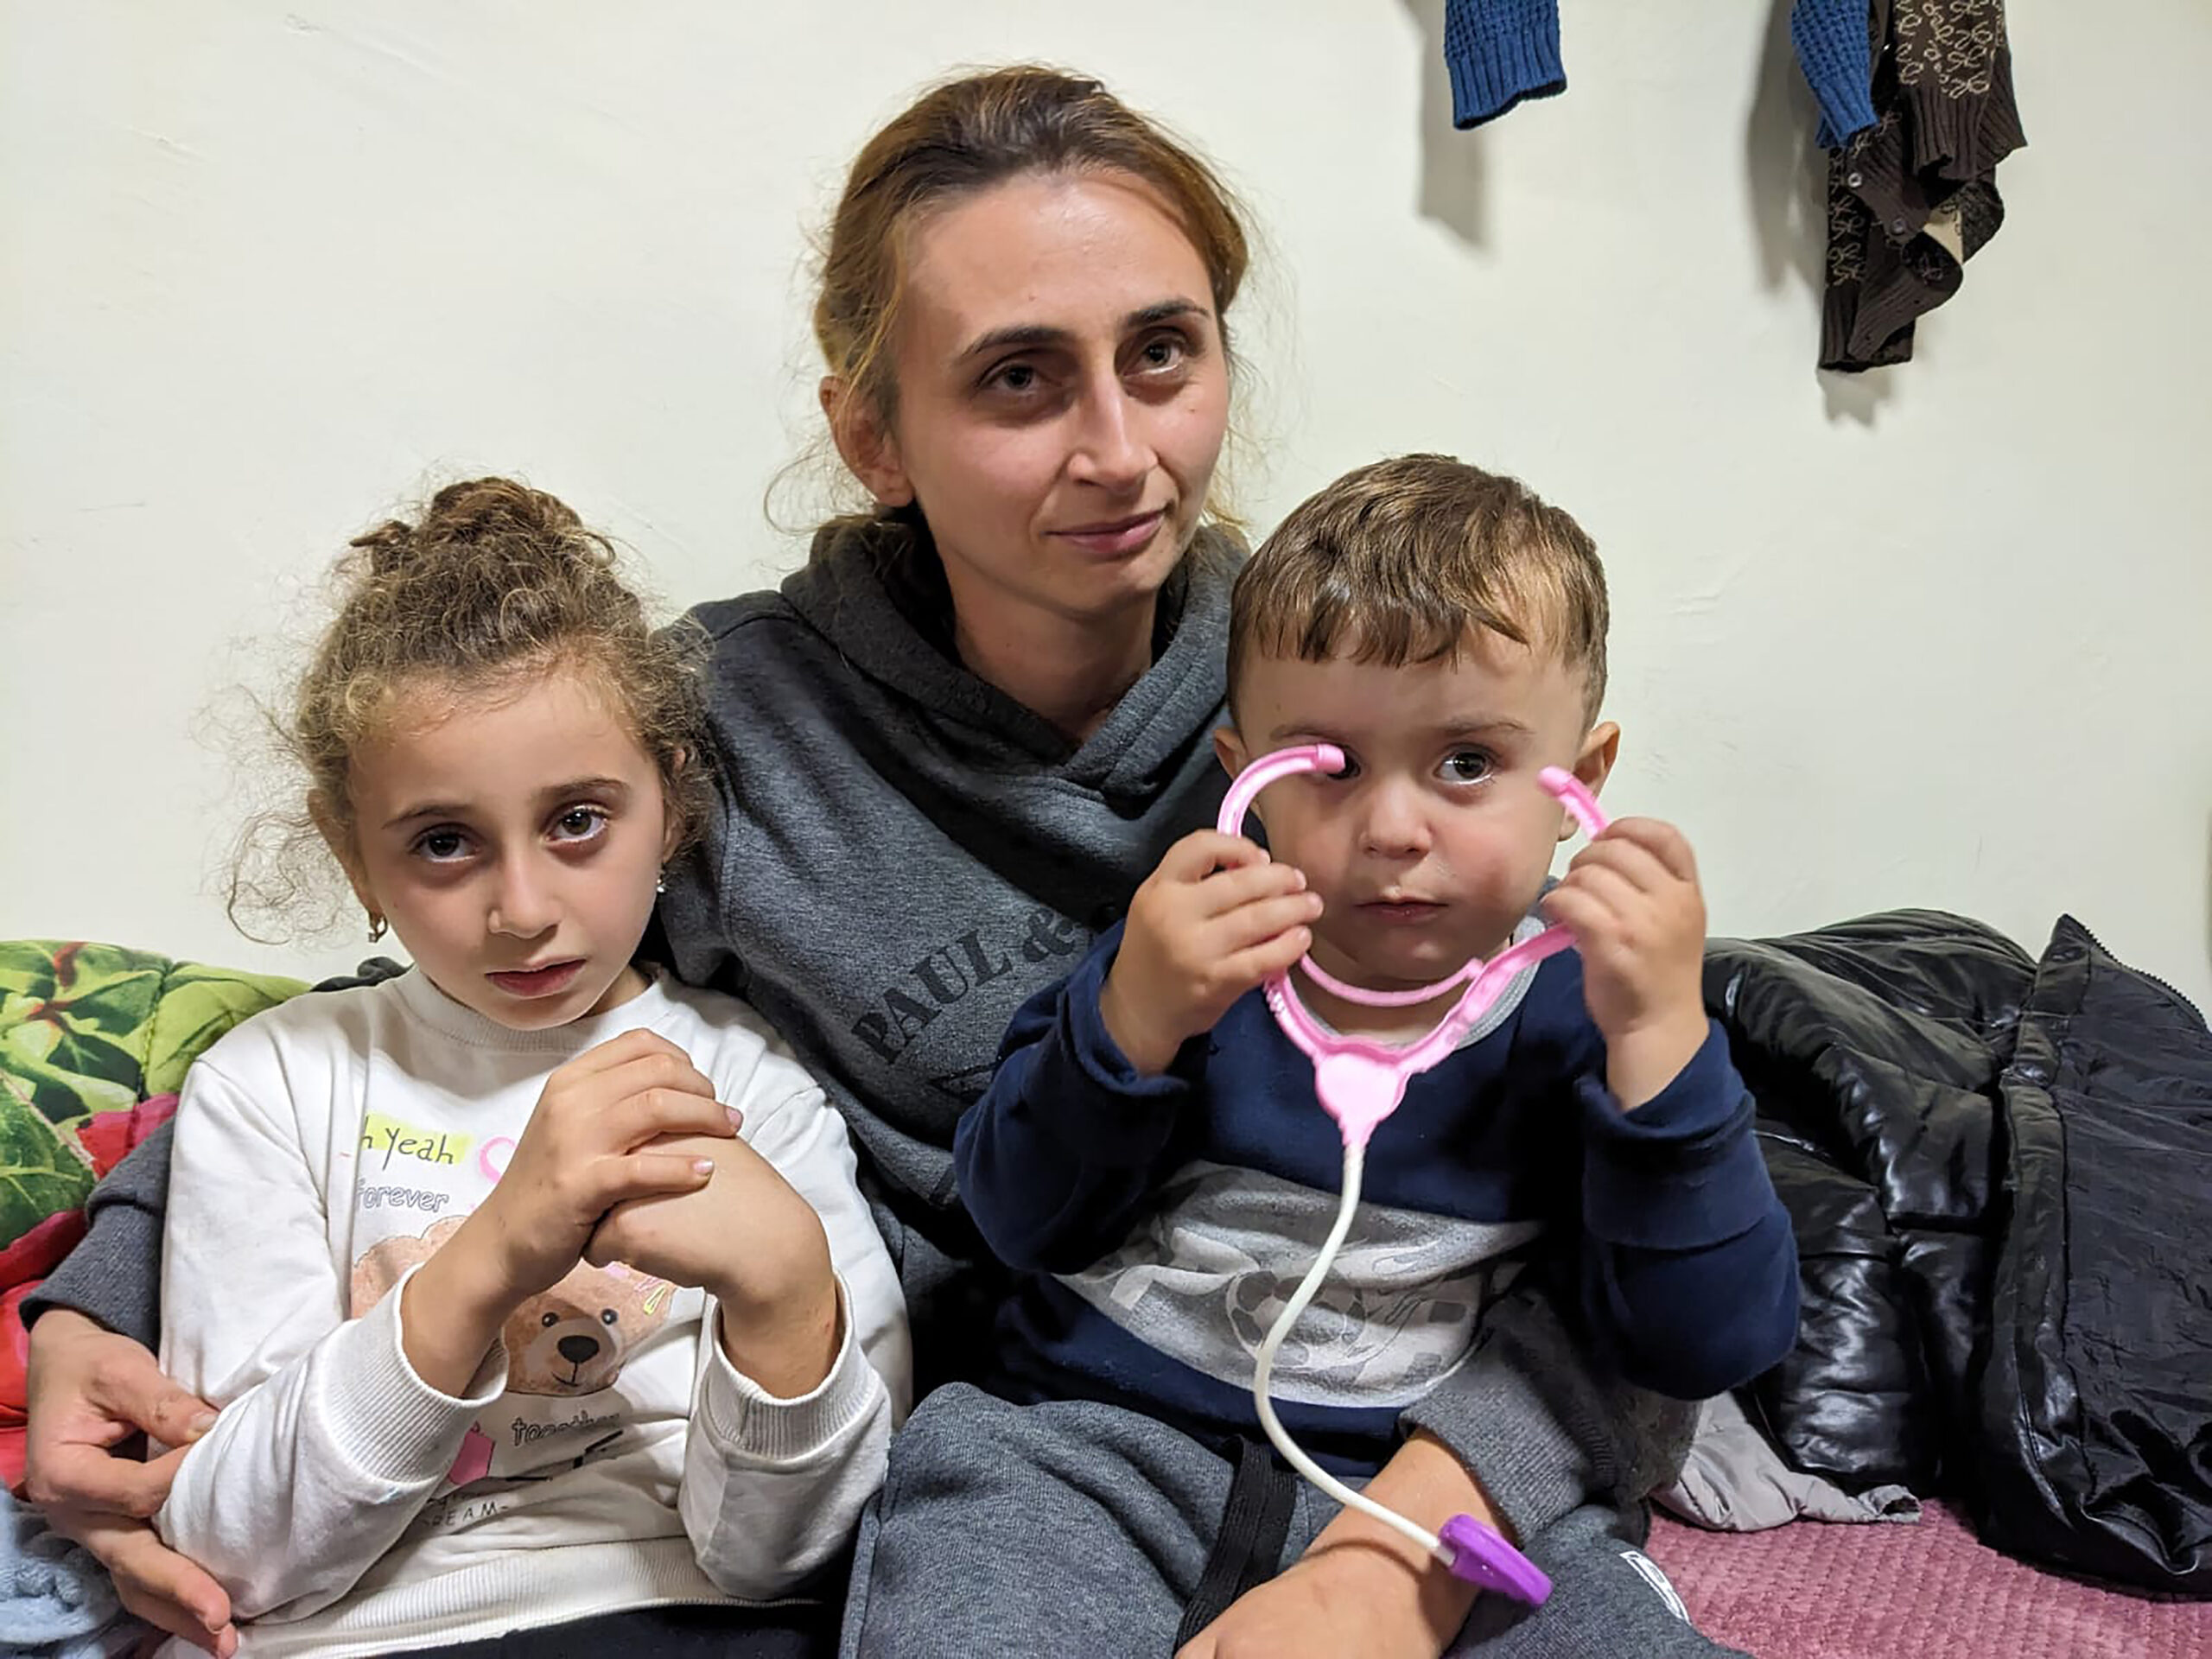 A refugee crisis is developing in Armenia. A political crisis will likely  quickly follow